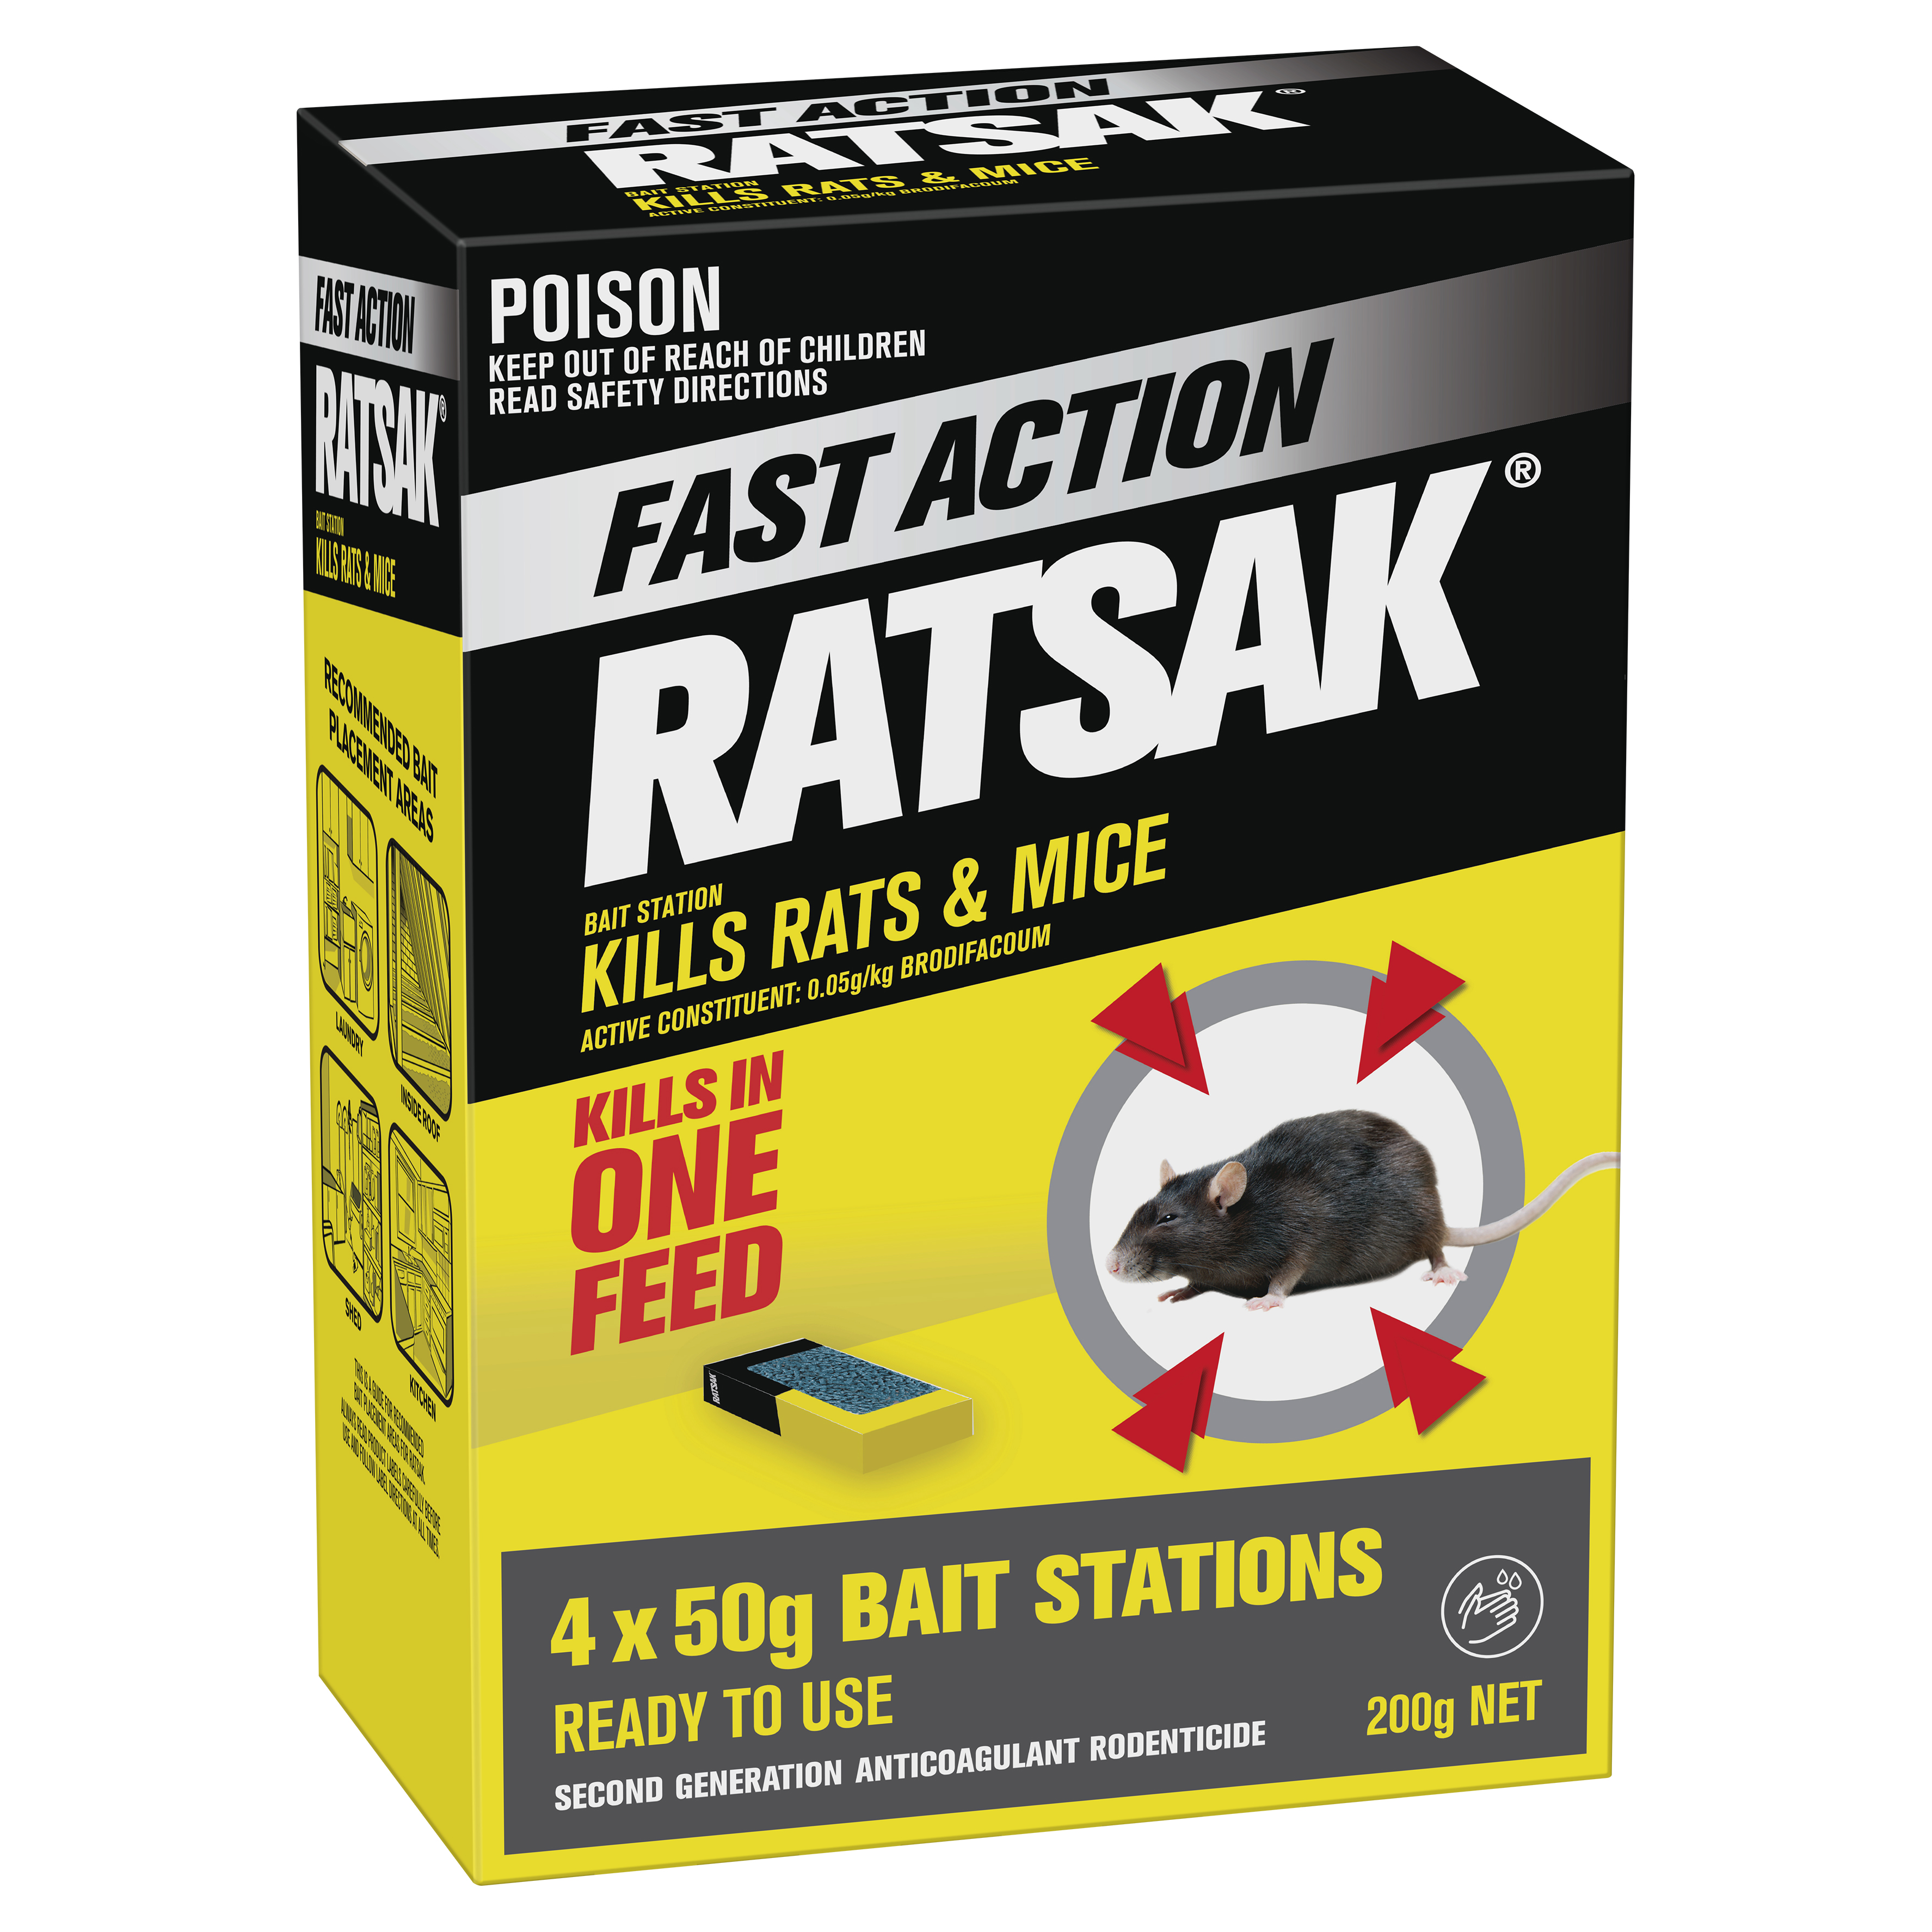 Why Rat X Is The Only Rat Poison I Will Ever Use - Safe